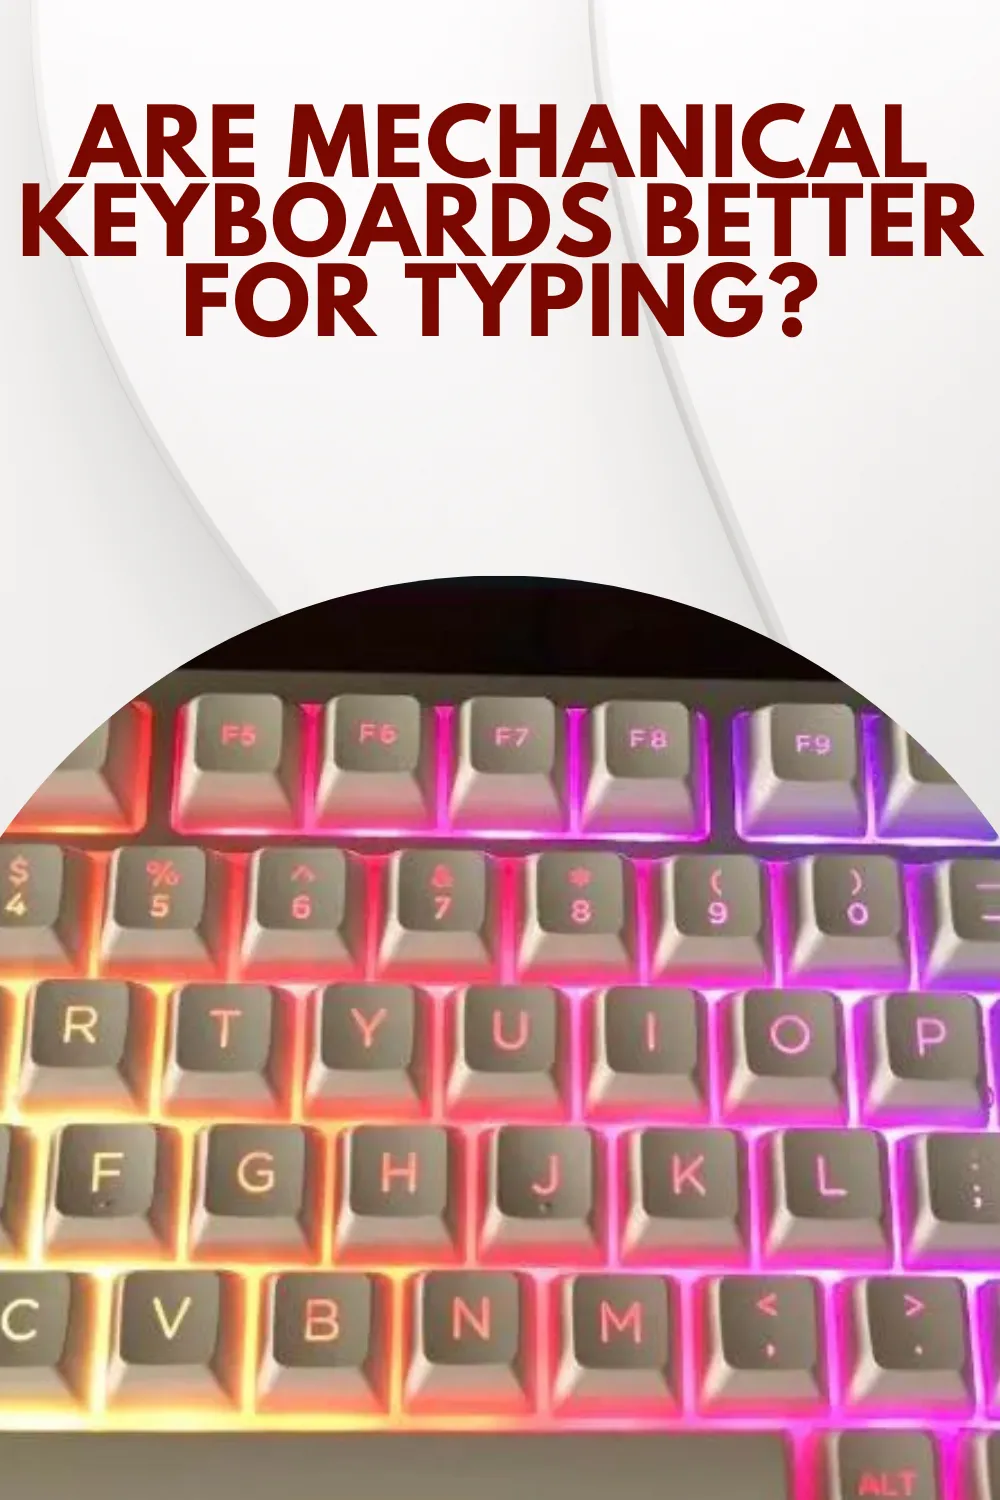 Are Mechanical Keyboards Better for Typing?